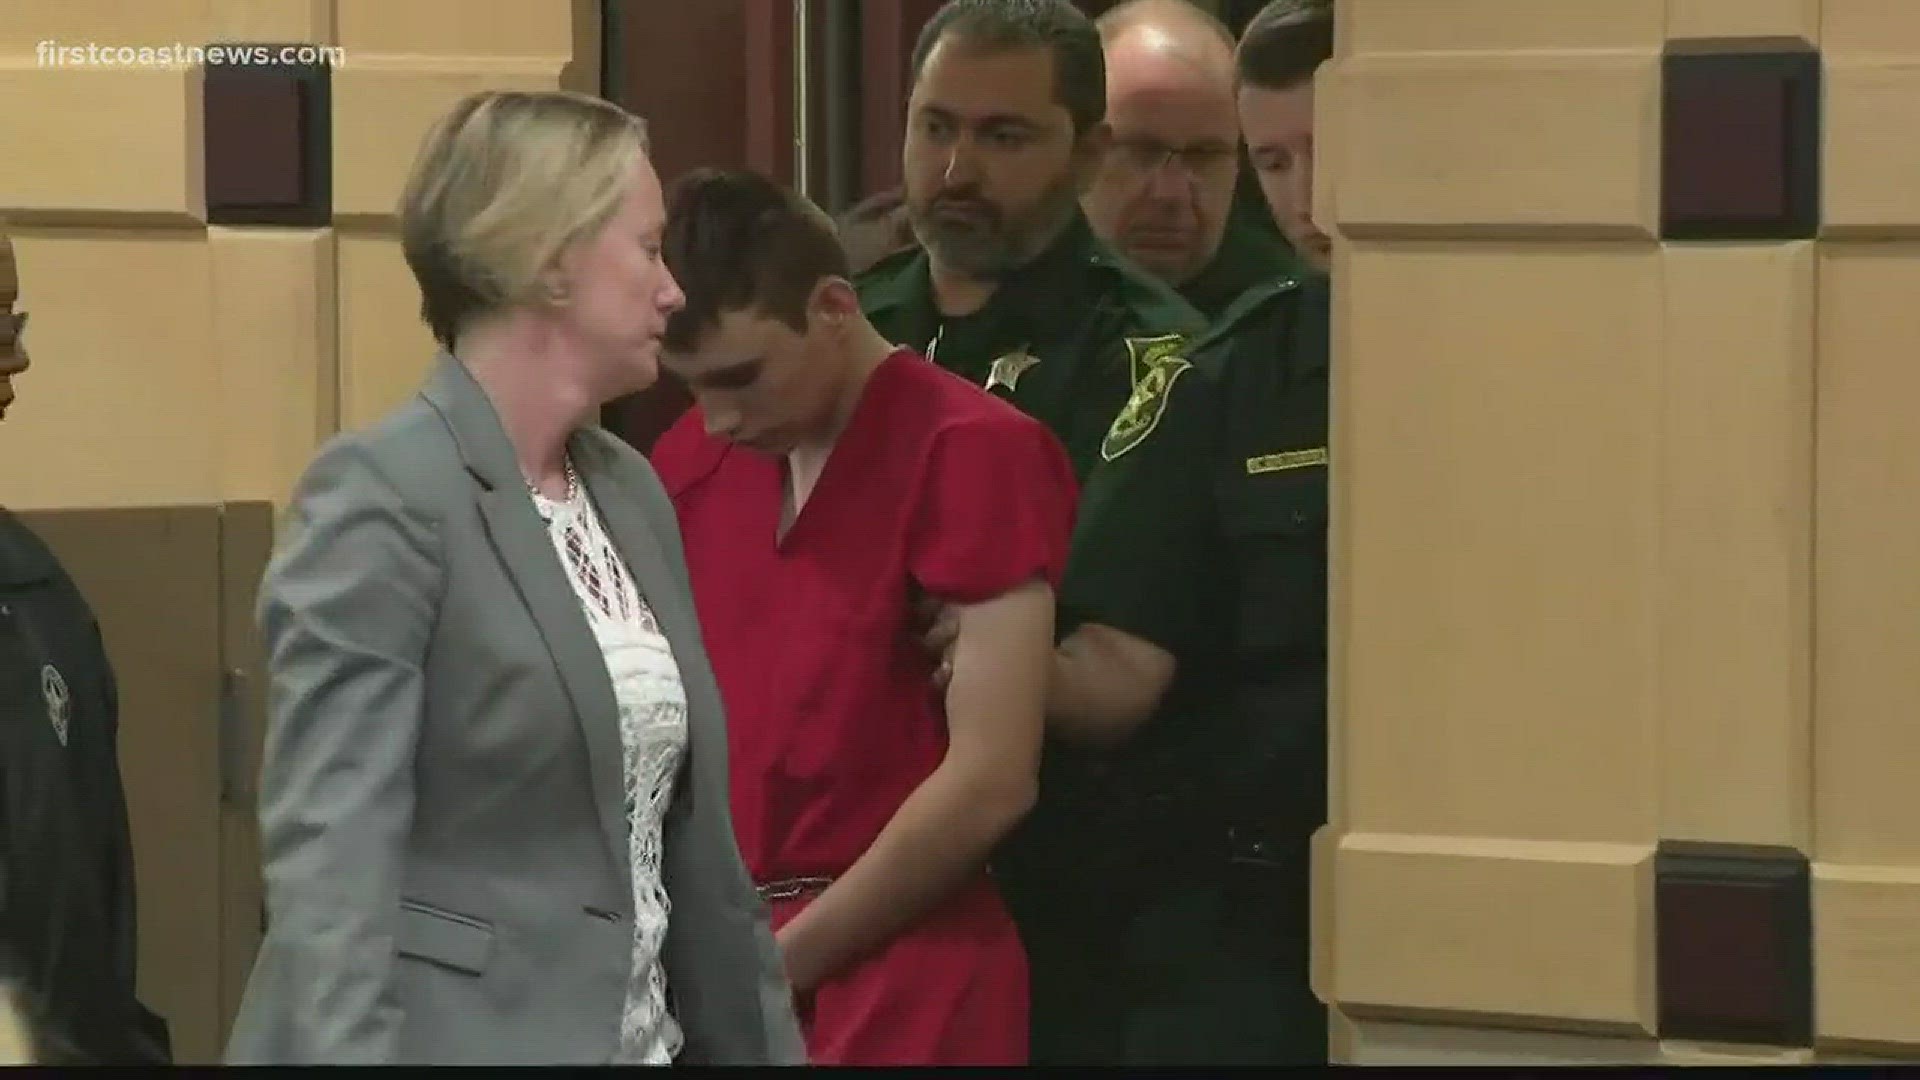 A grand jury in Fort Lauderdale returned the indictment Wednesday against the 19-year-old Cruz for the Valentine's Day massacre at Marjory Stoneman Douglas High School in Parkland in which 17 people died and 16 were wounded.